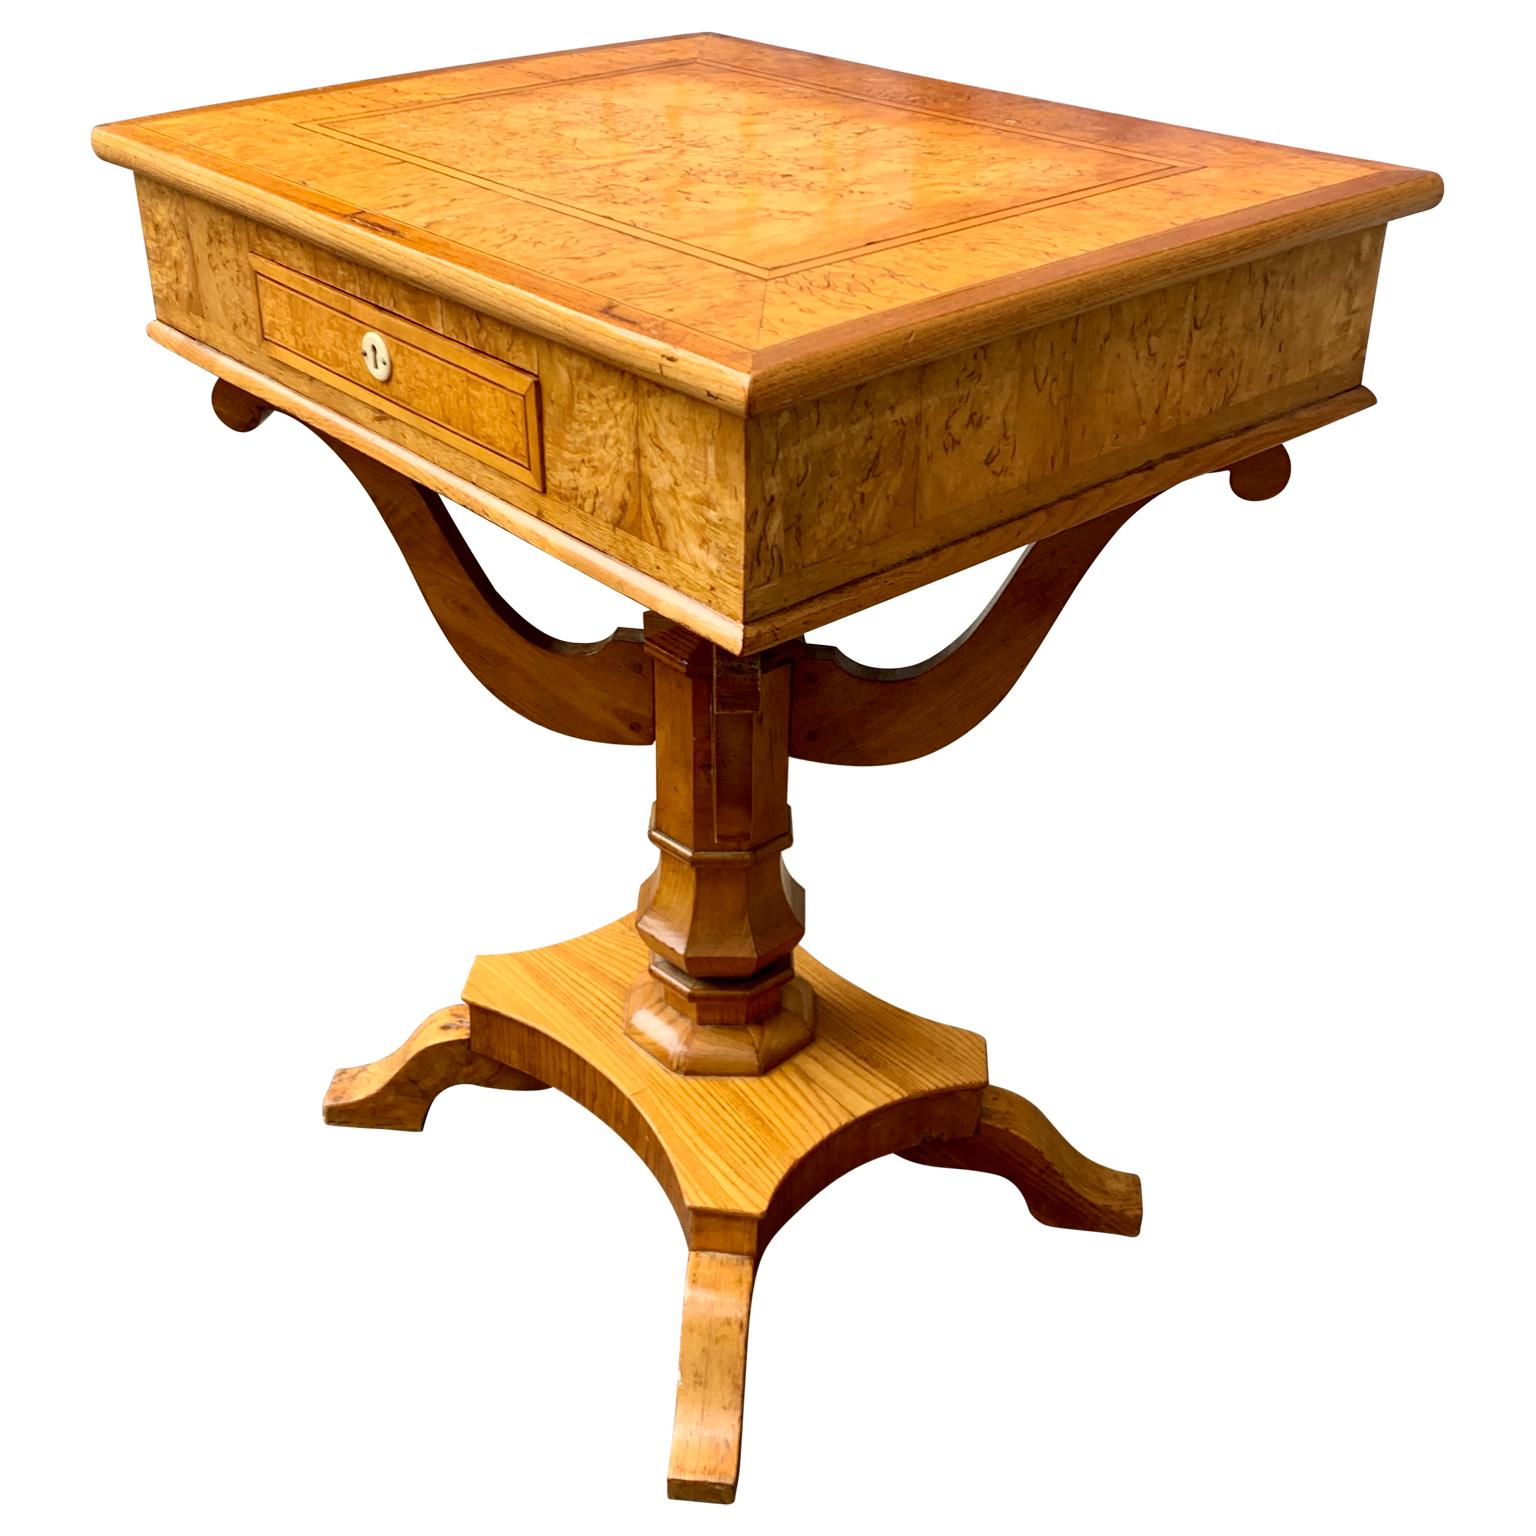 A Swedish sewing table in birch from the Biedermeier period, also called Karl Johan in Sweden. This style follows the name of the regent King of the period Karl the XIV Johan. This first part of the 19th Century working table for wealthy ladies, has